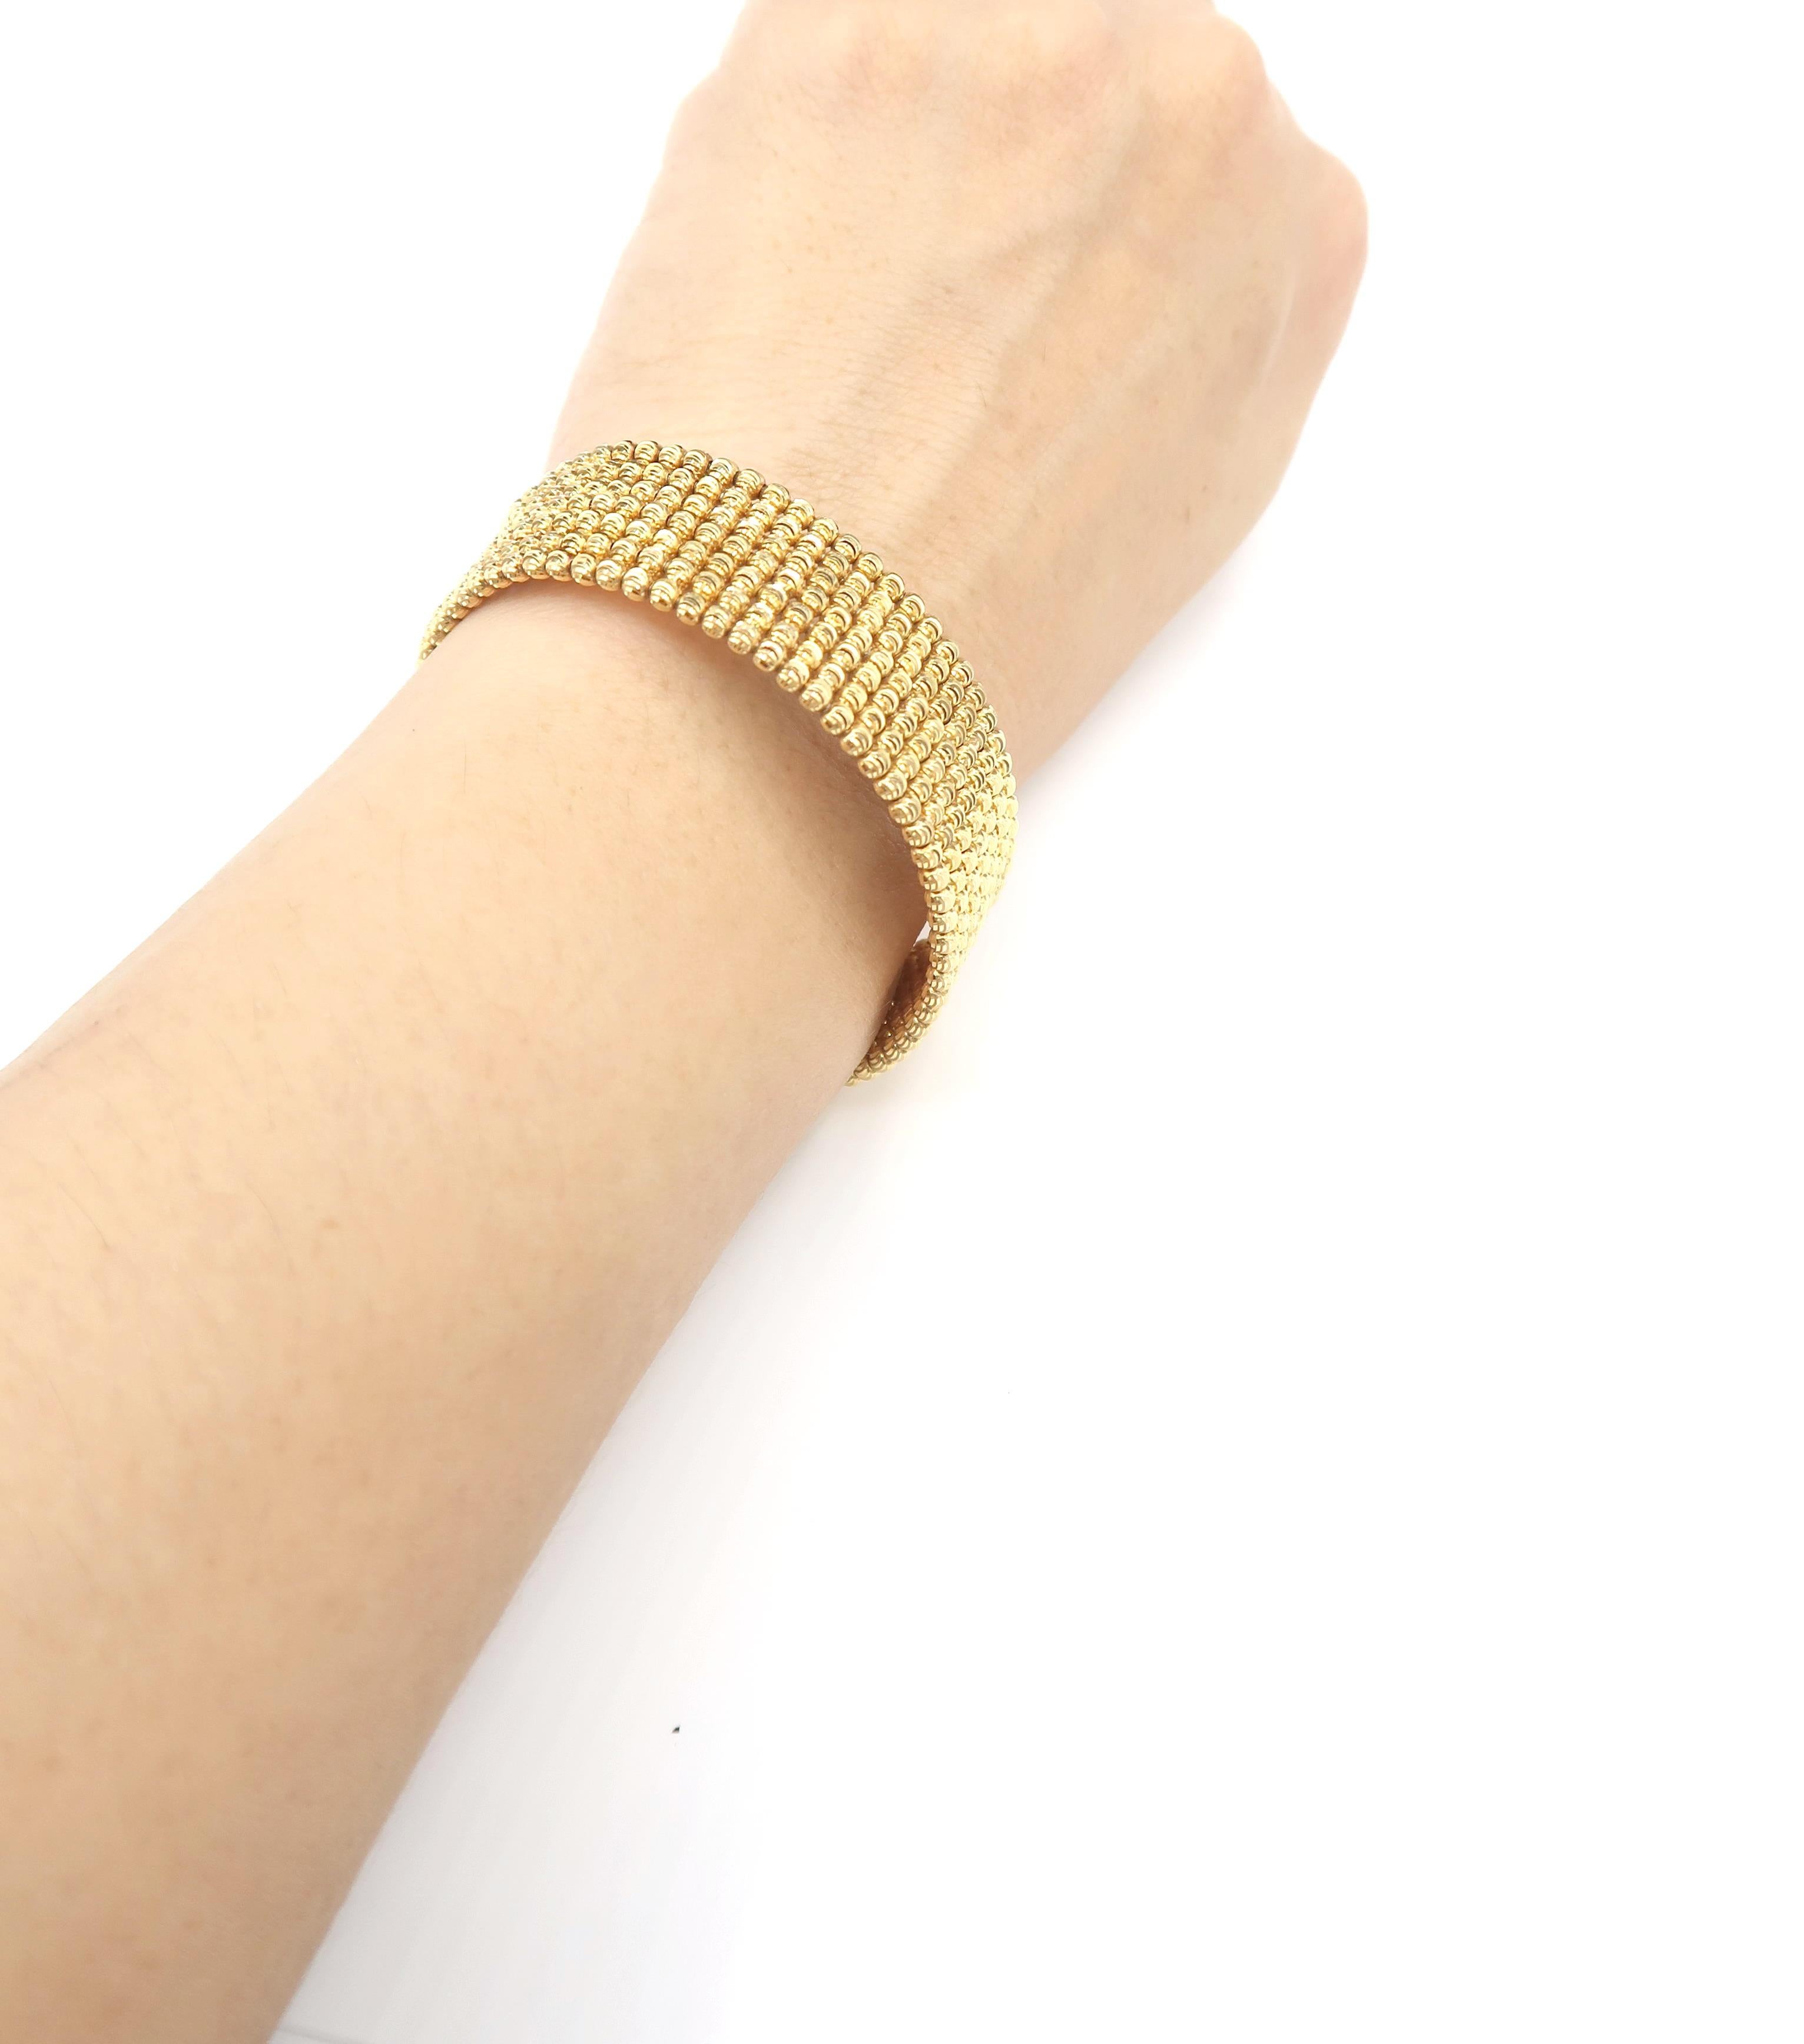 BOON 18K Gold Faceted Bead 7 Rows Bangle 1